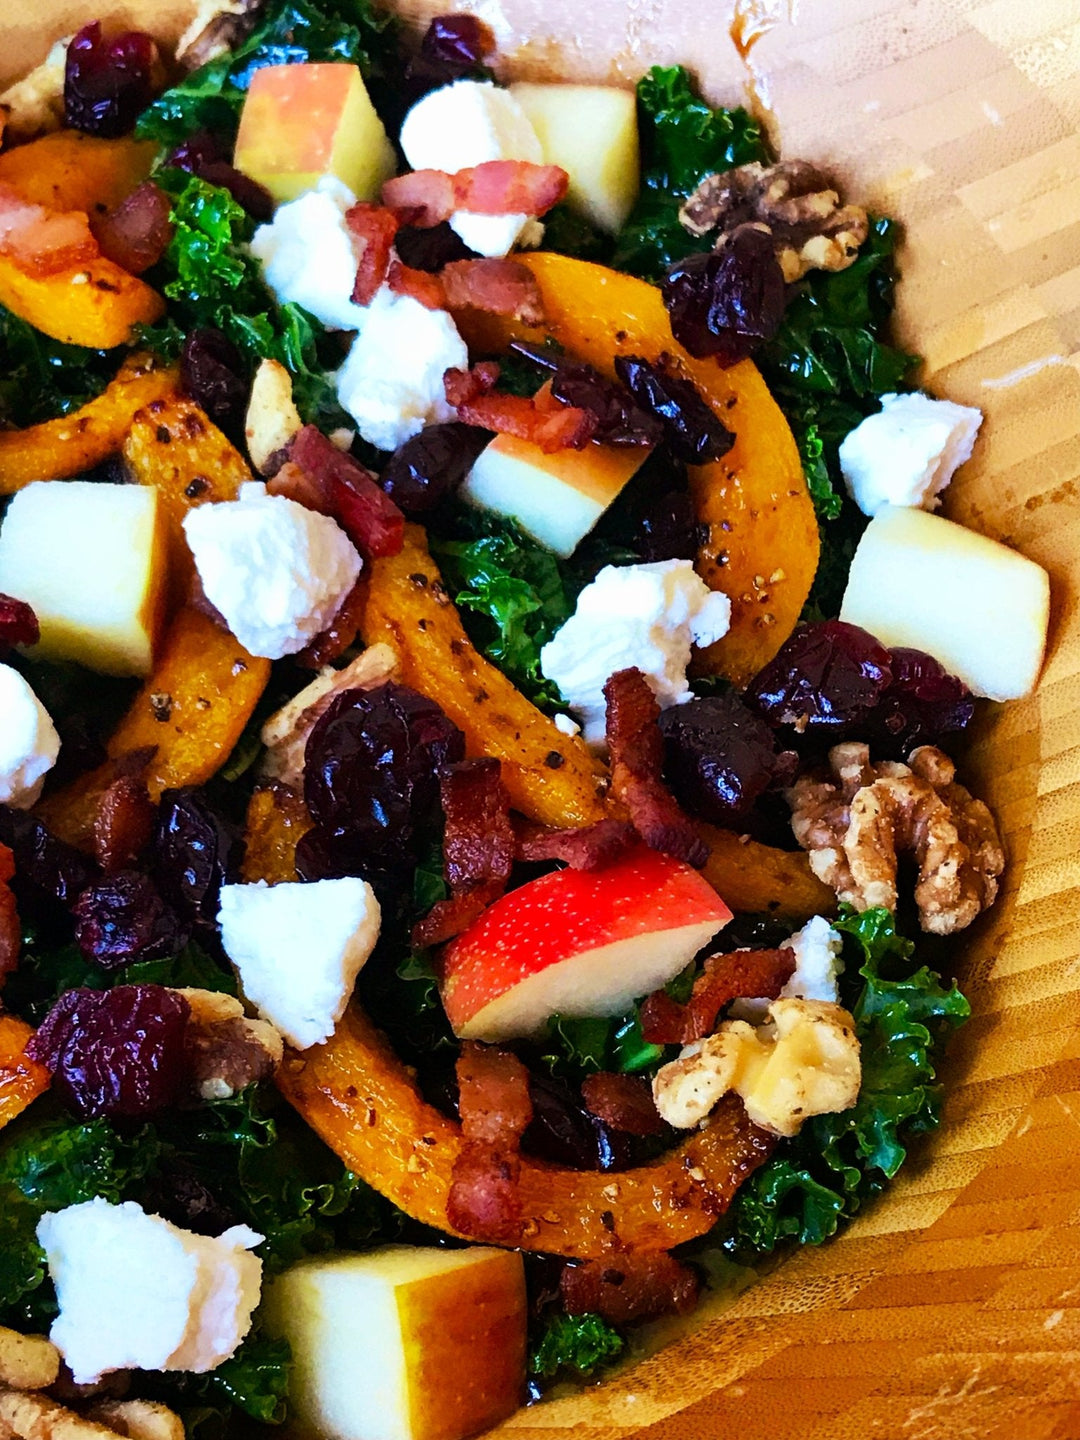 Kale & Roasted Butternut Squash Salad  w/ Warm Maple Fig Vinaigrette - Texas Hill Country Olive Co.